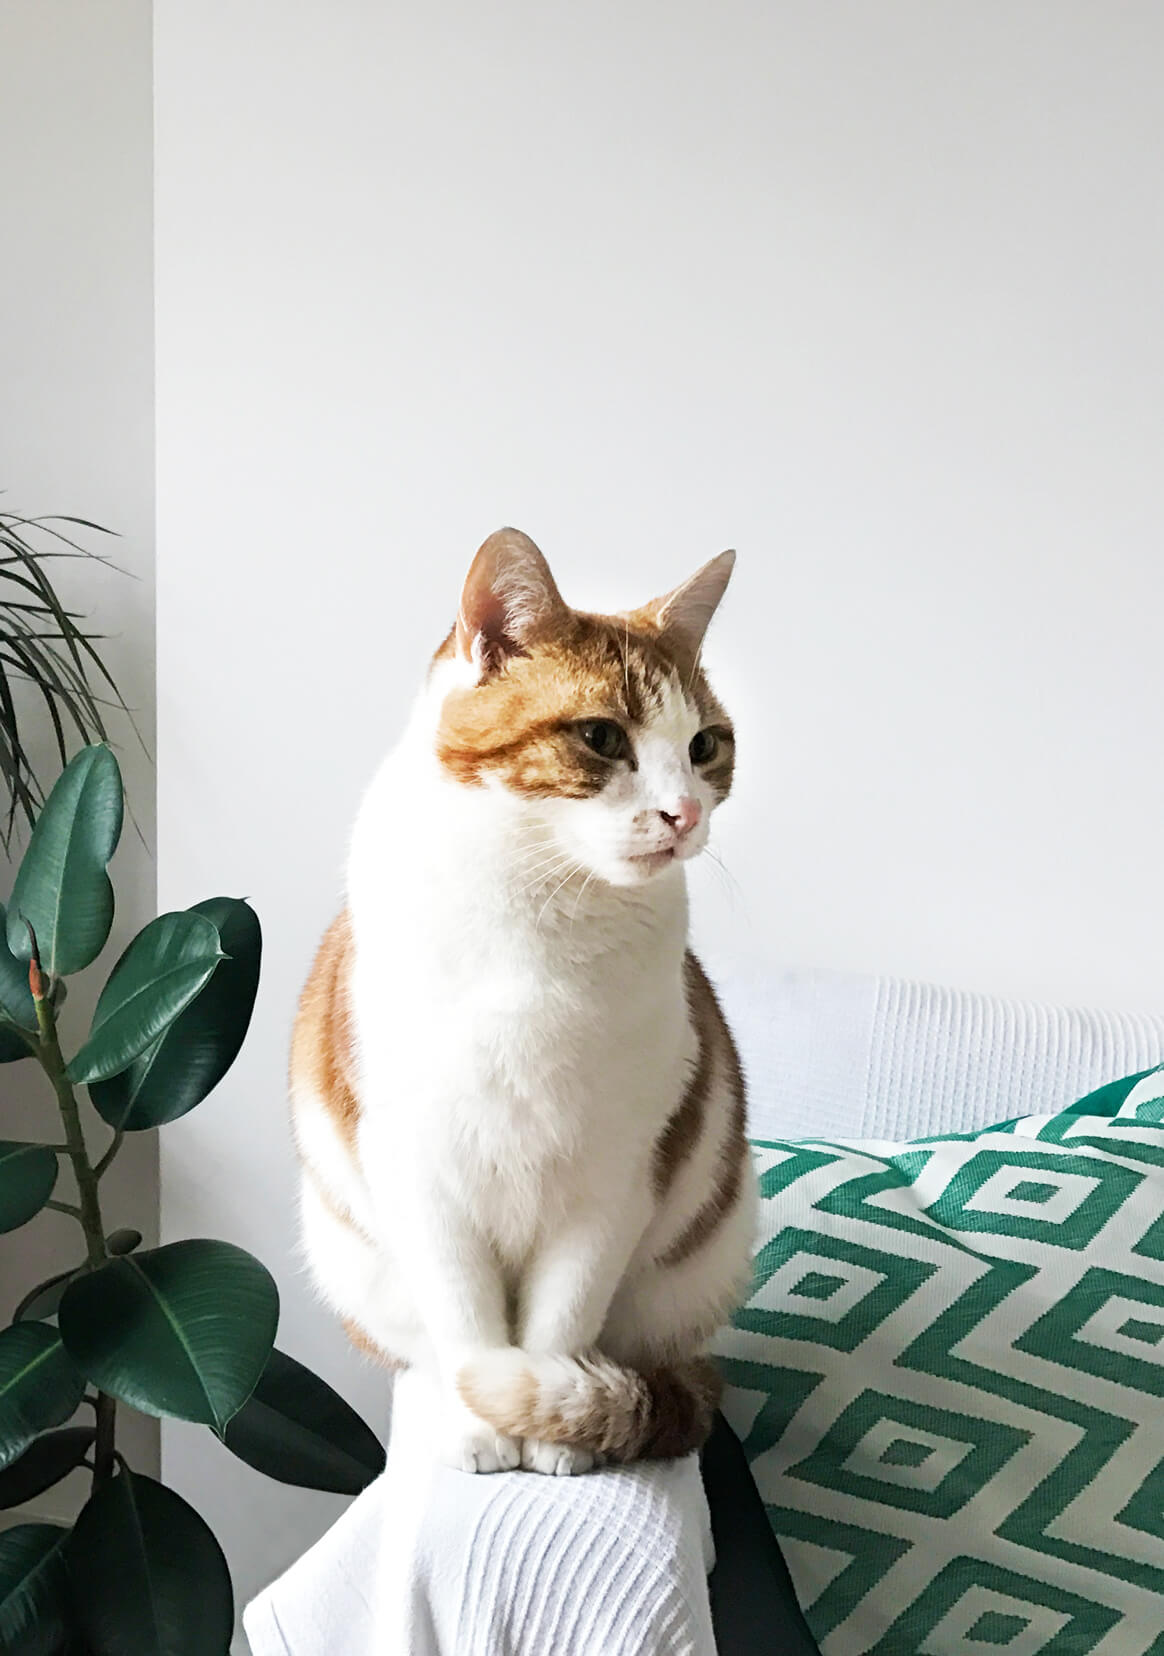 Red and white cat on a sofa arm with plants on the background